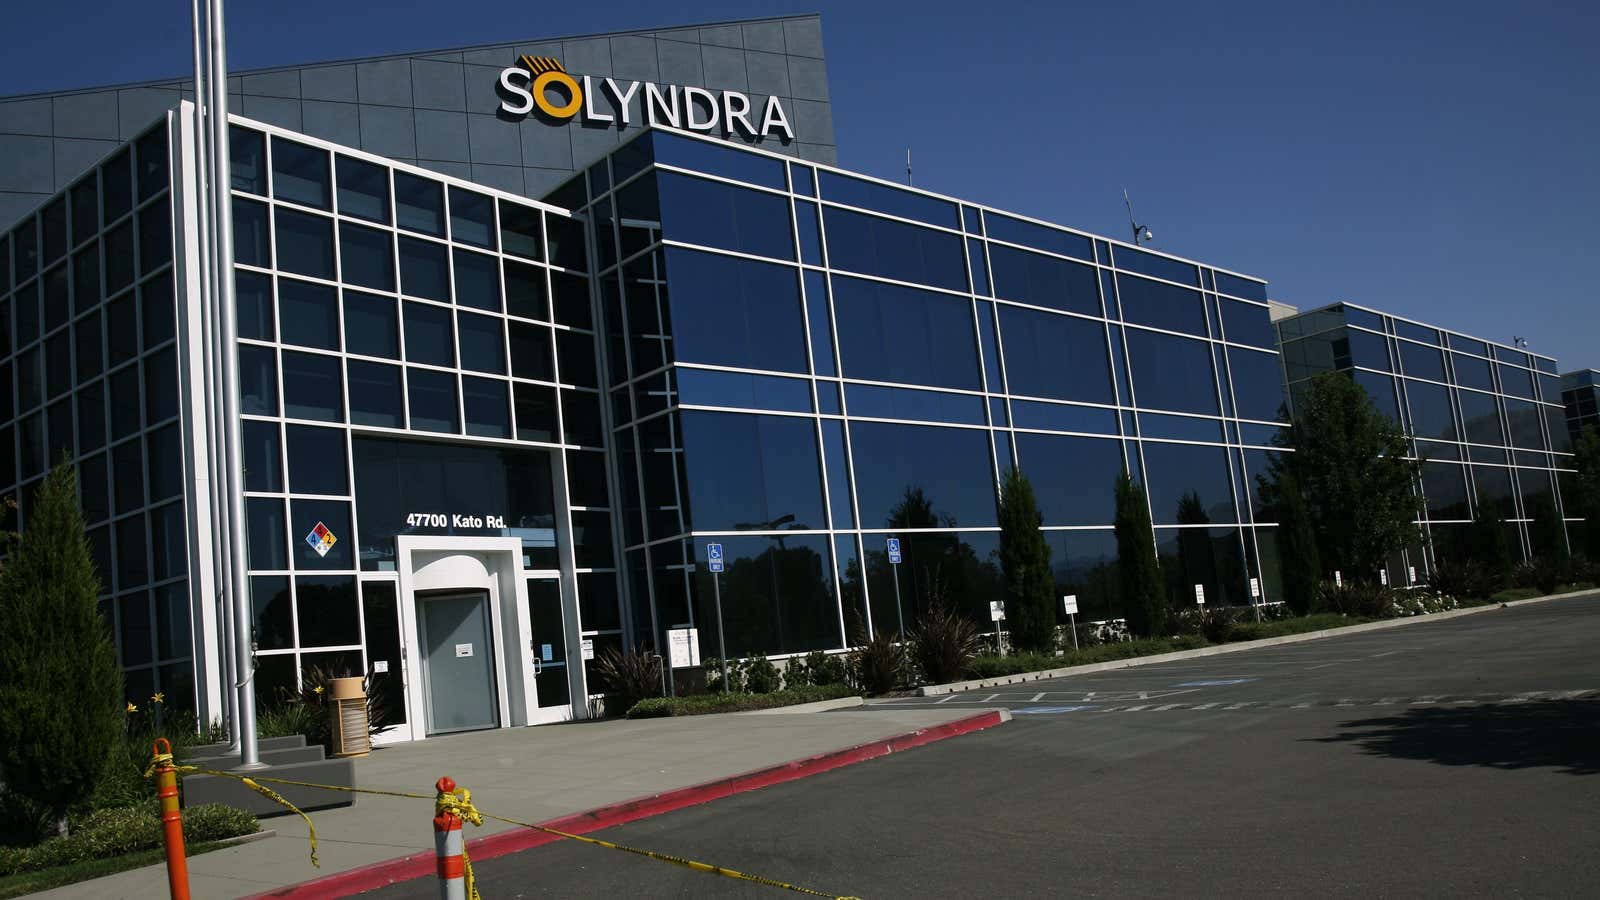 The collapse in 2011 of California solar panel producer Solyndra after it received a federal loan guarantee left a lingering aversion to risk.